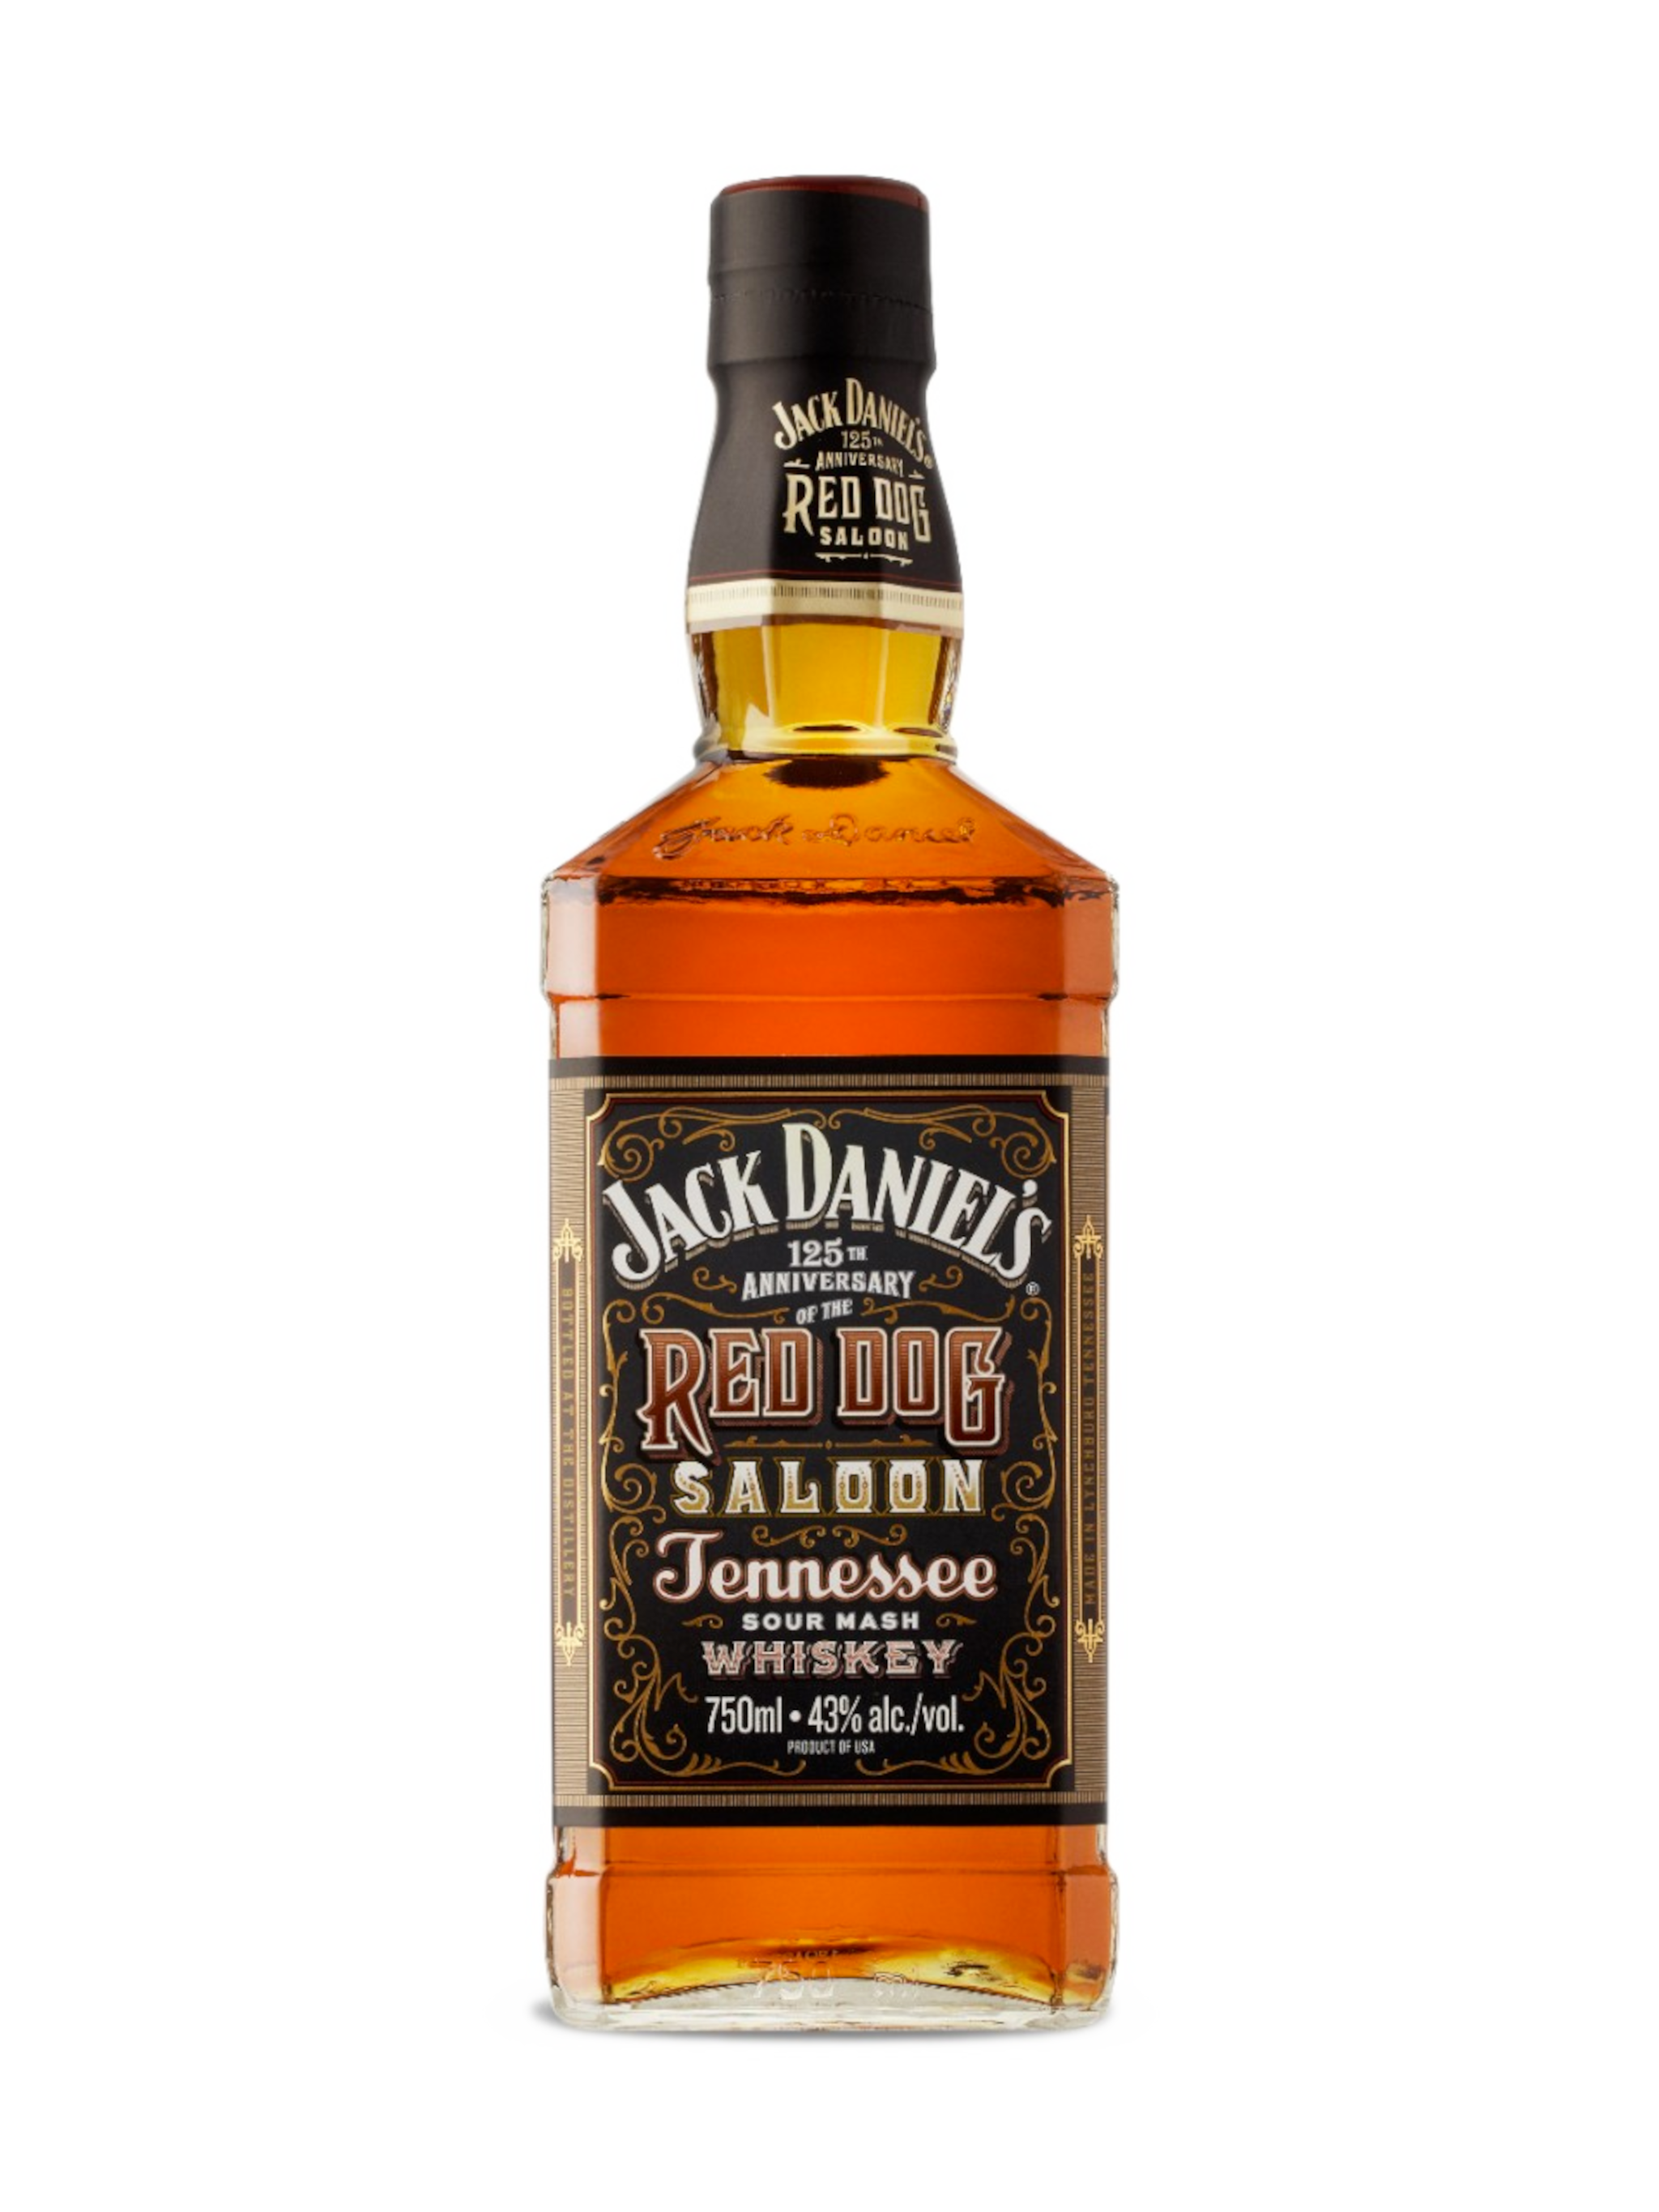 Jack Daniel's 125th Anniversary Of The Red Dog Saloon